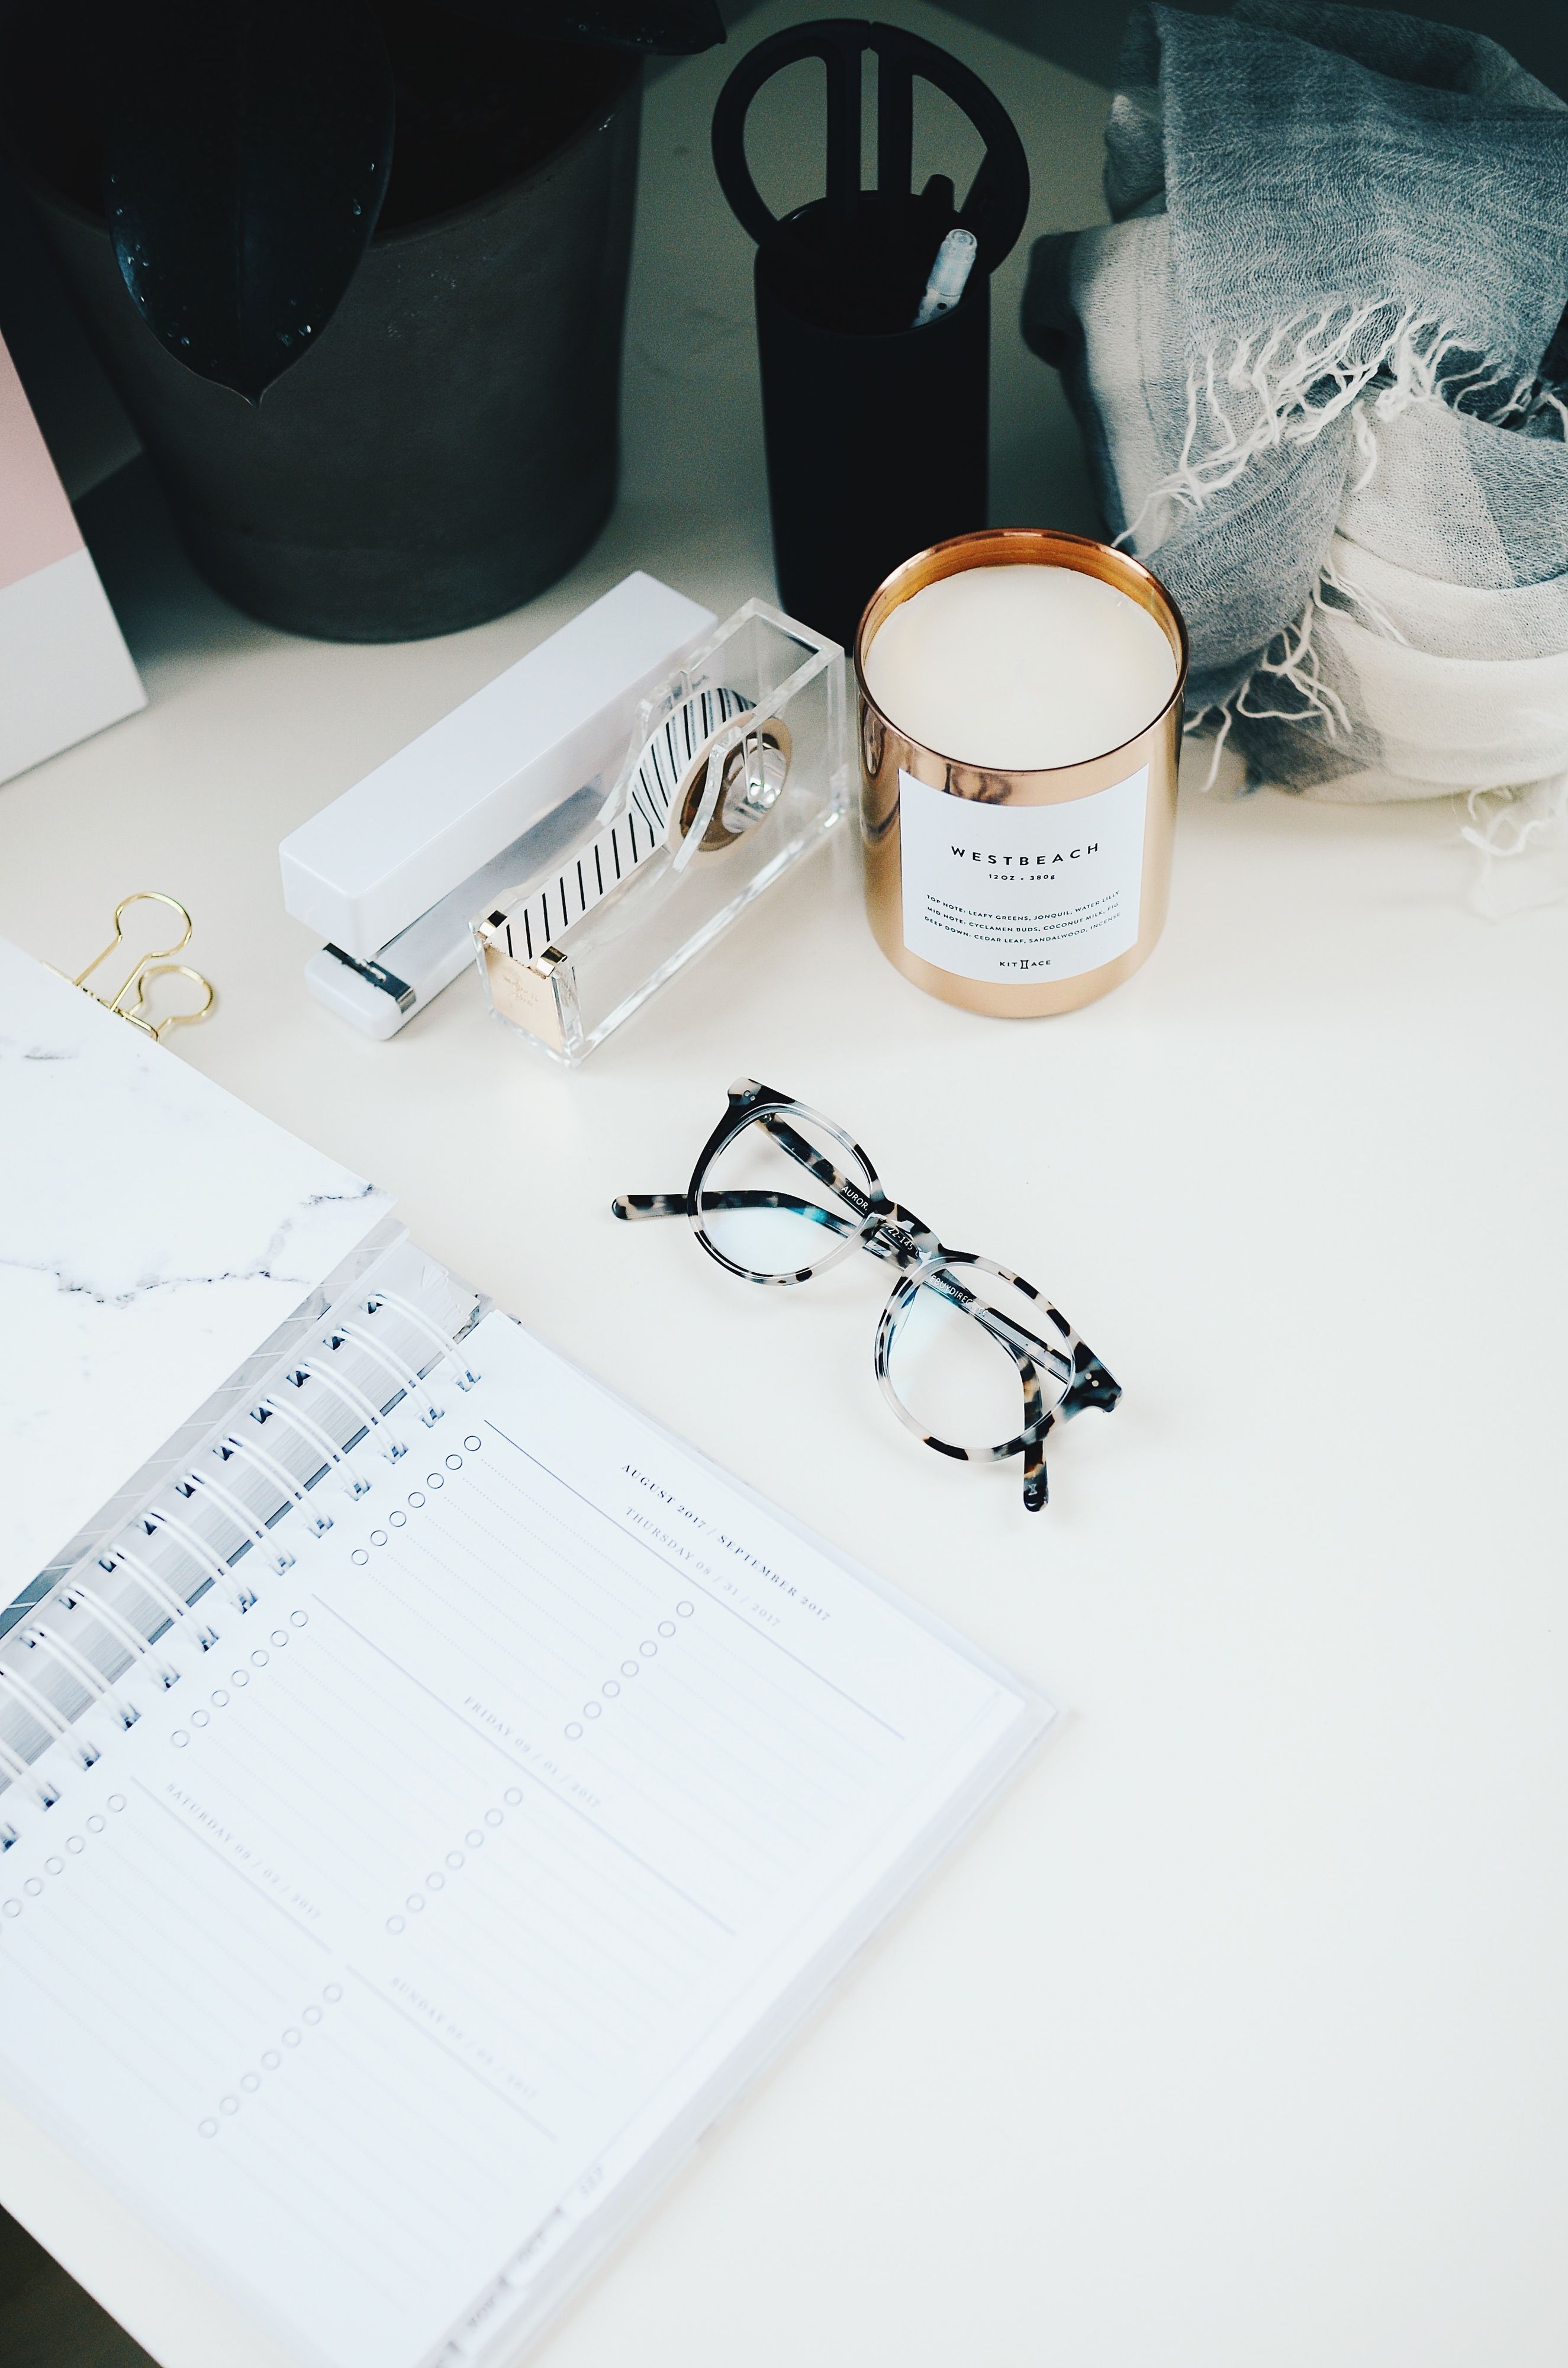 Glasses and task list on desk workspace for office manager executive assistant